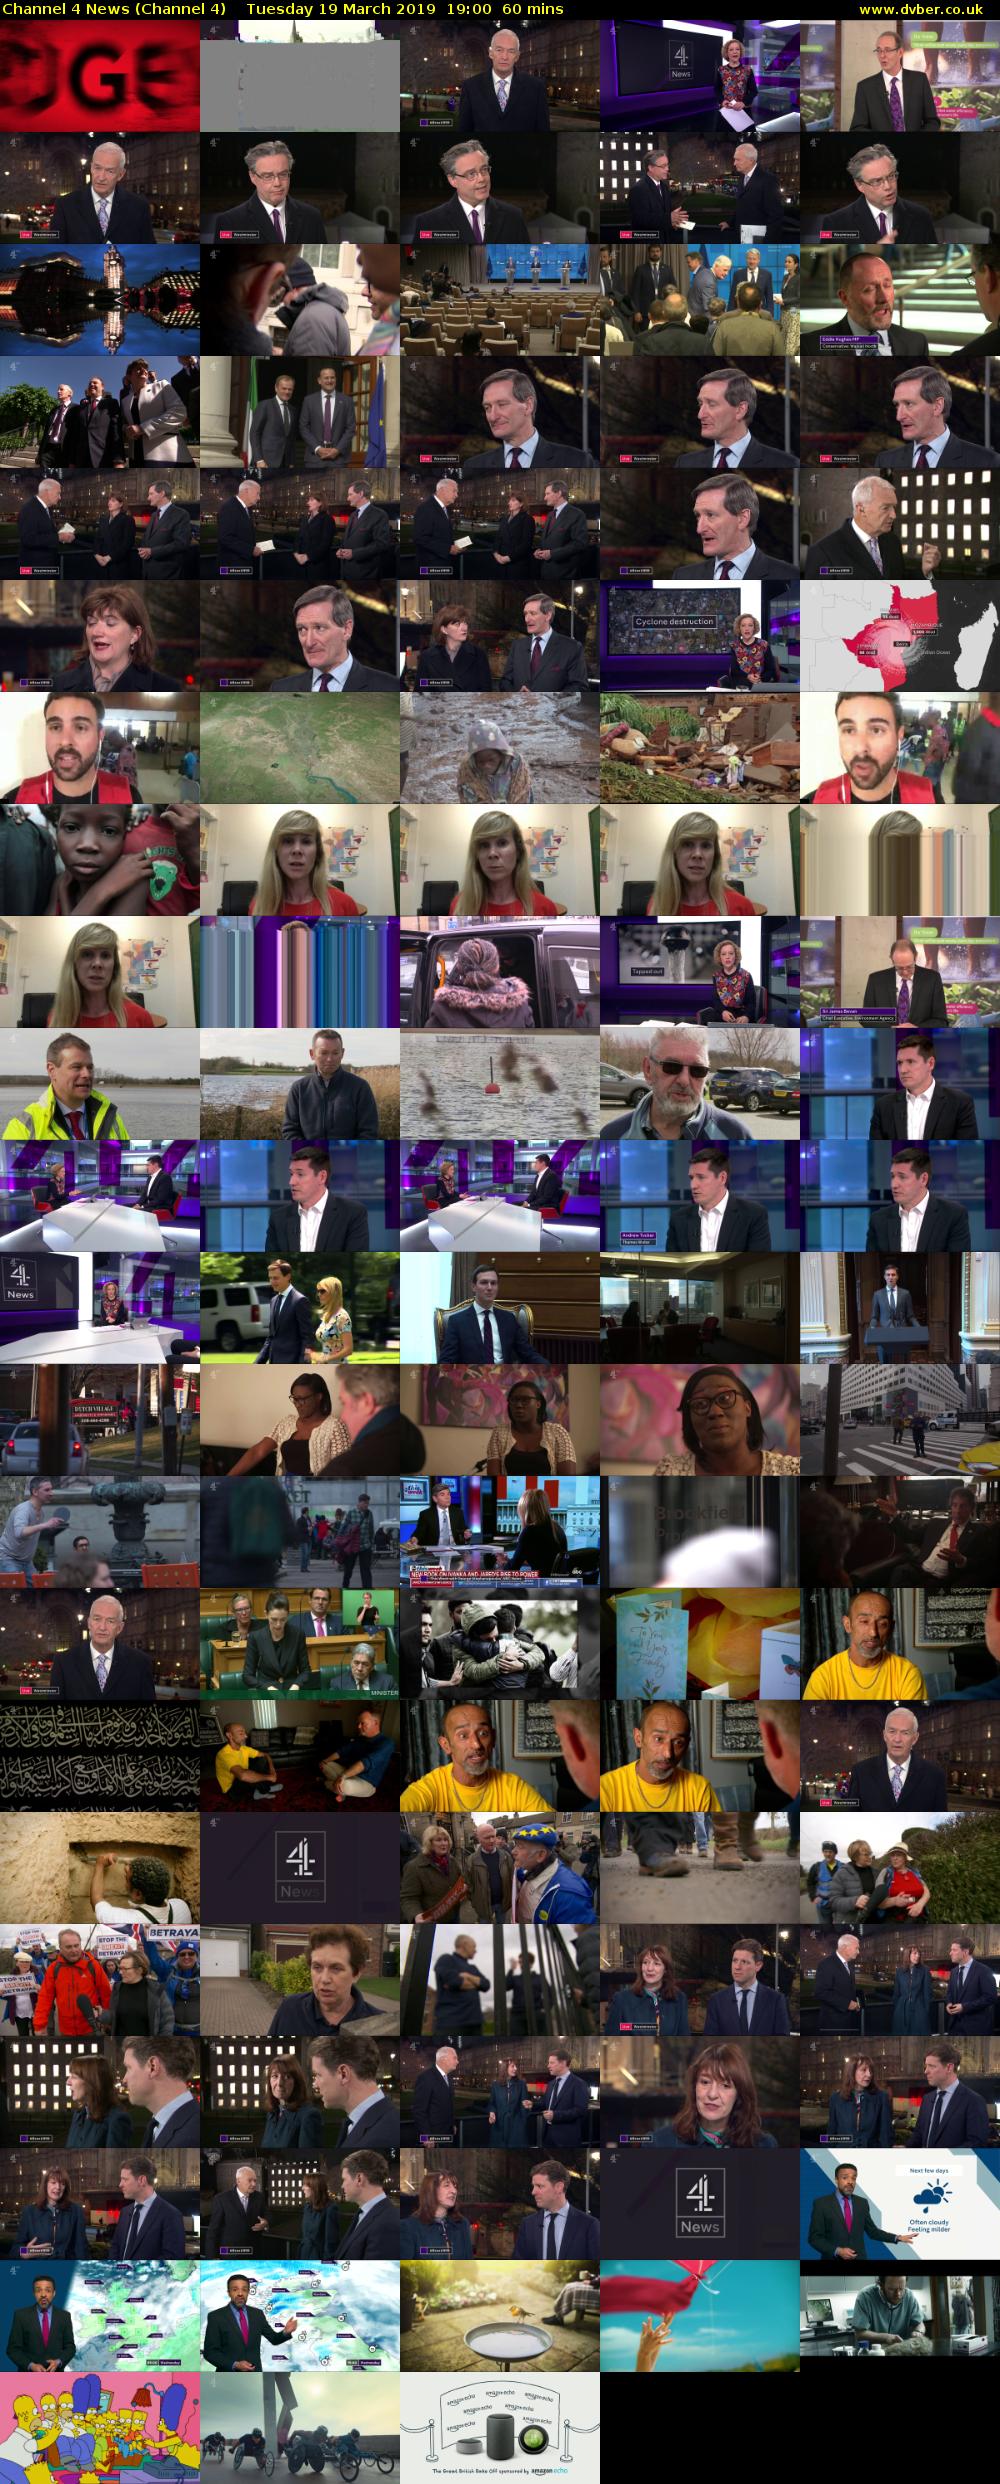 Channel 4 News (Channel 4) Tuesday 19 March 2019 19:00 - 20:00